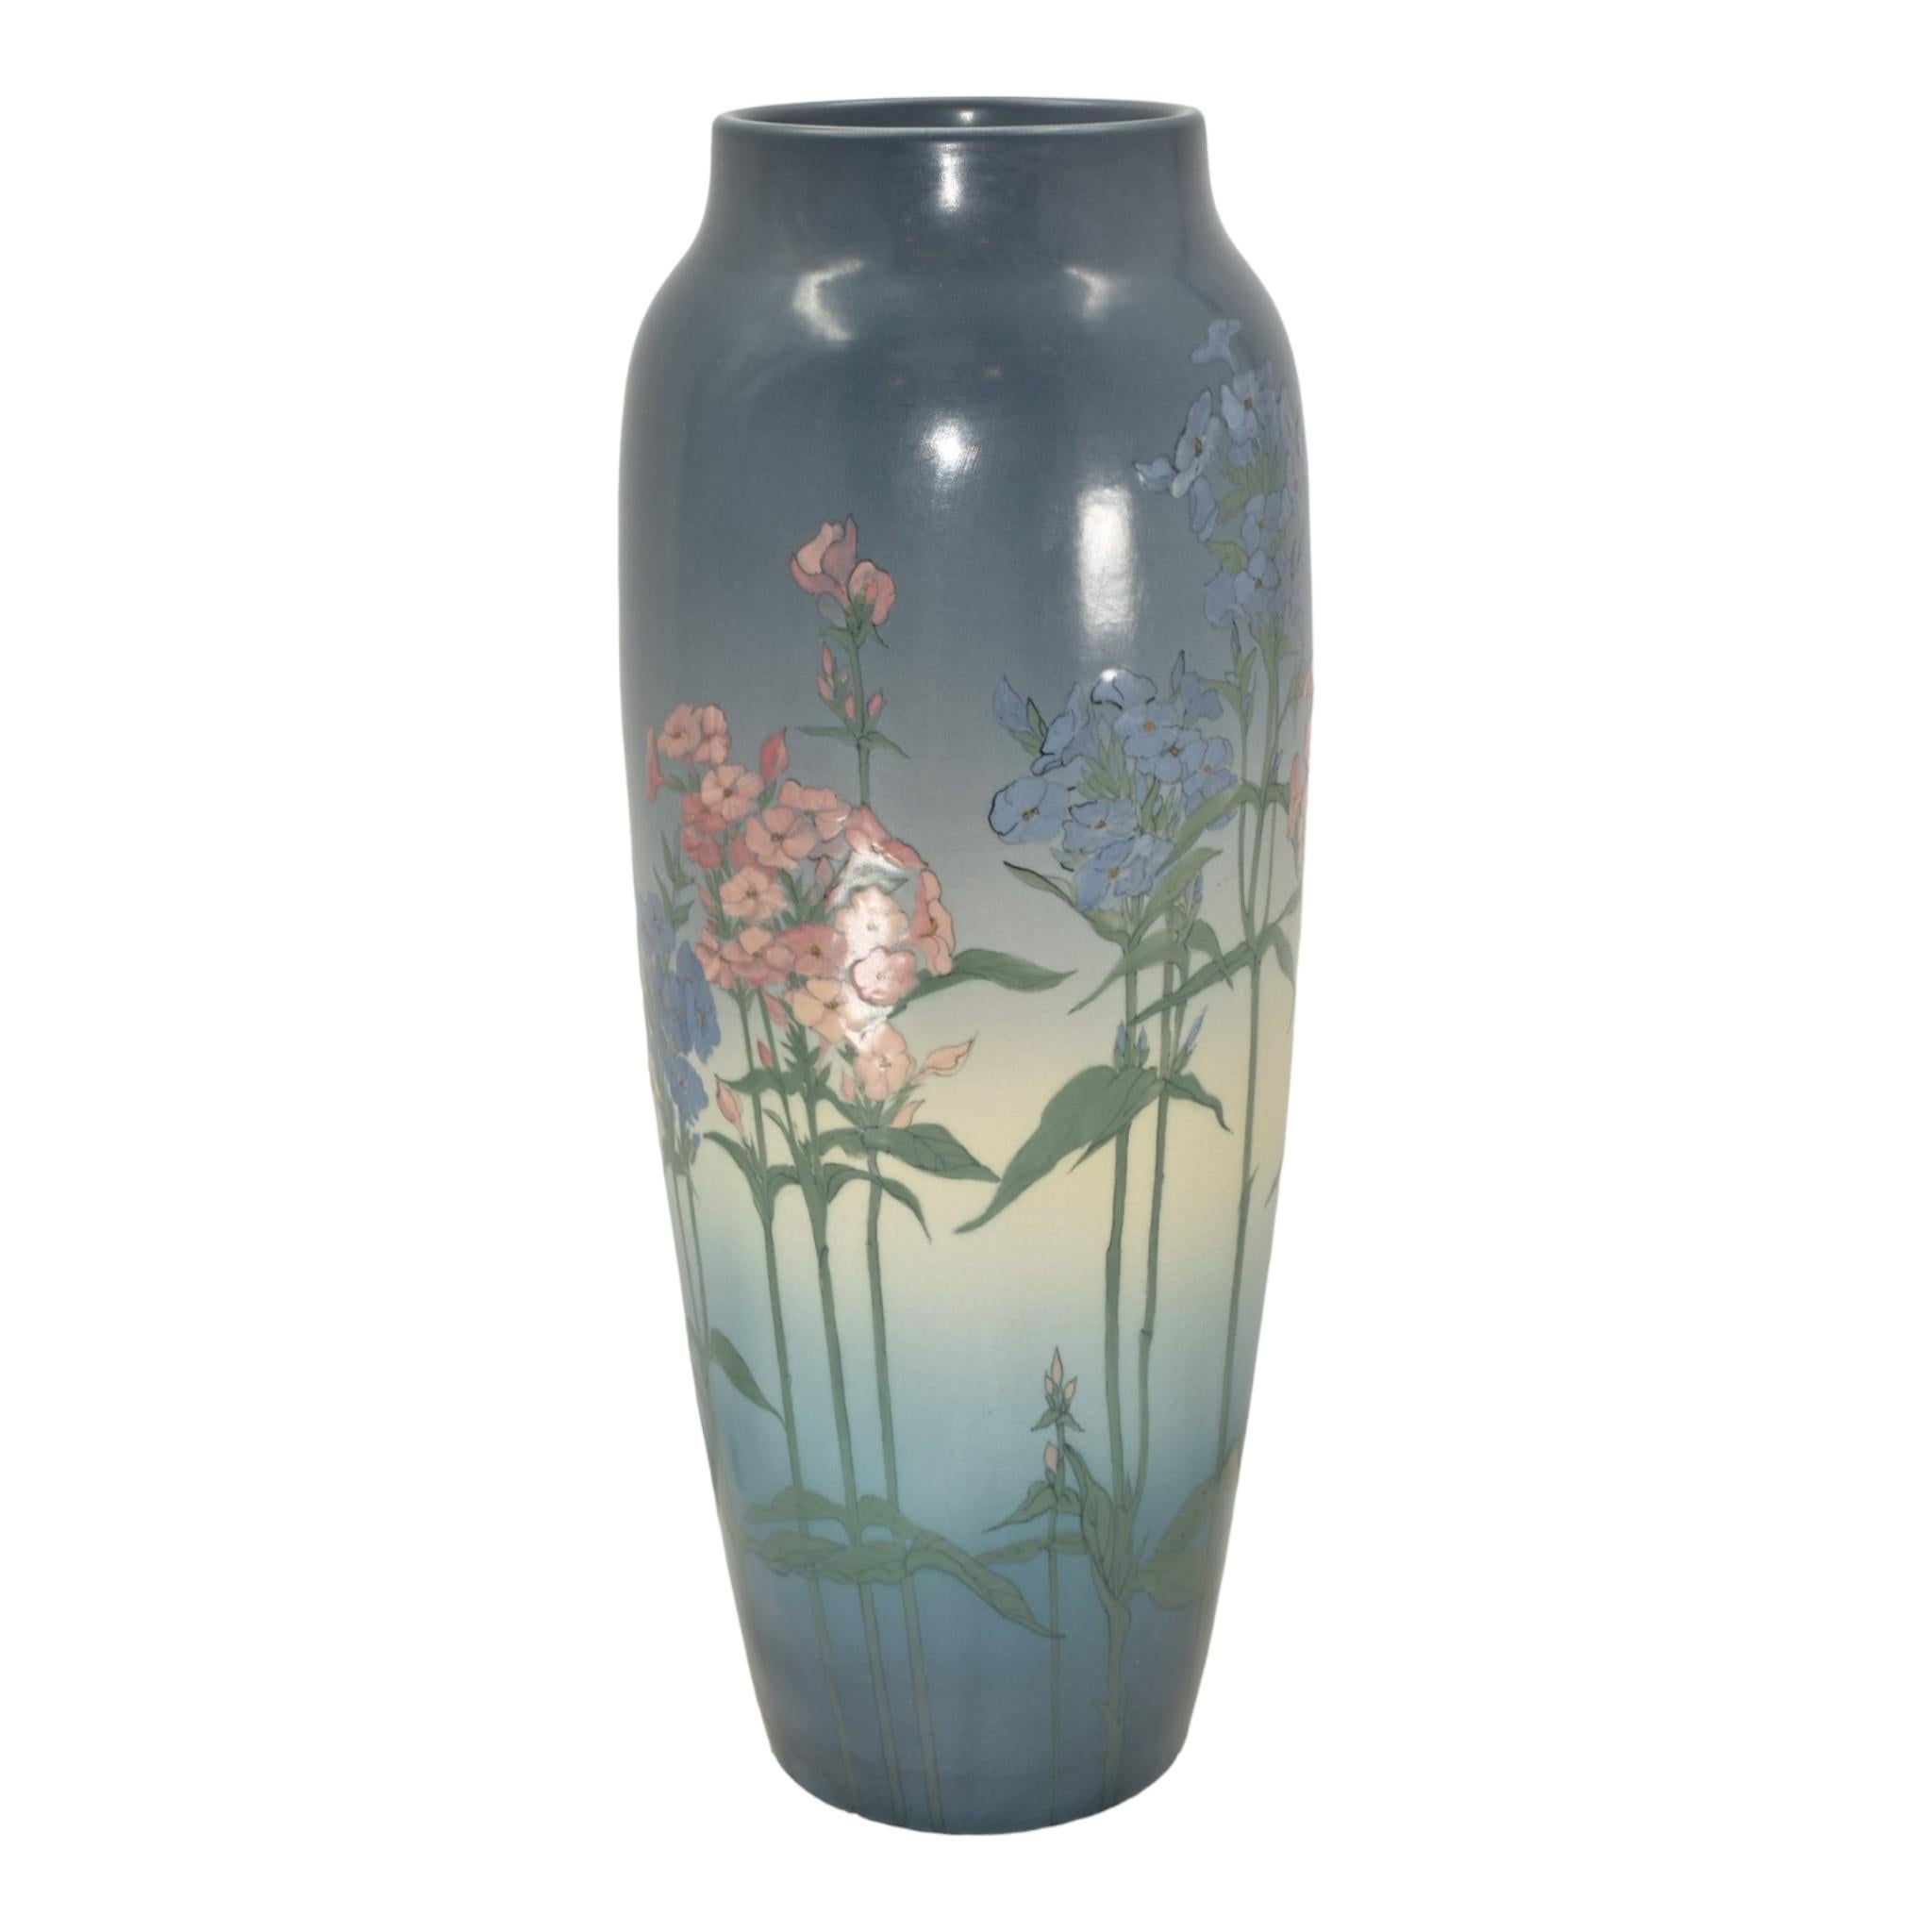 Rookwood 1920 Vintage Art Pottery Blue Vellum Ceramic Floor Vase 907A (Epply) In Good Condition For Sale In East Peoria, IL